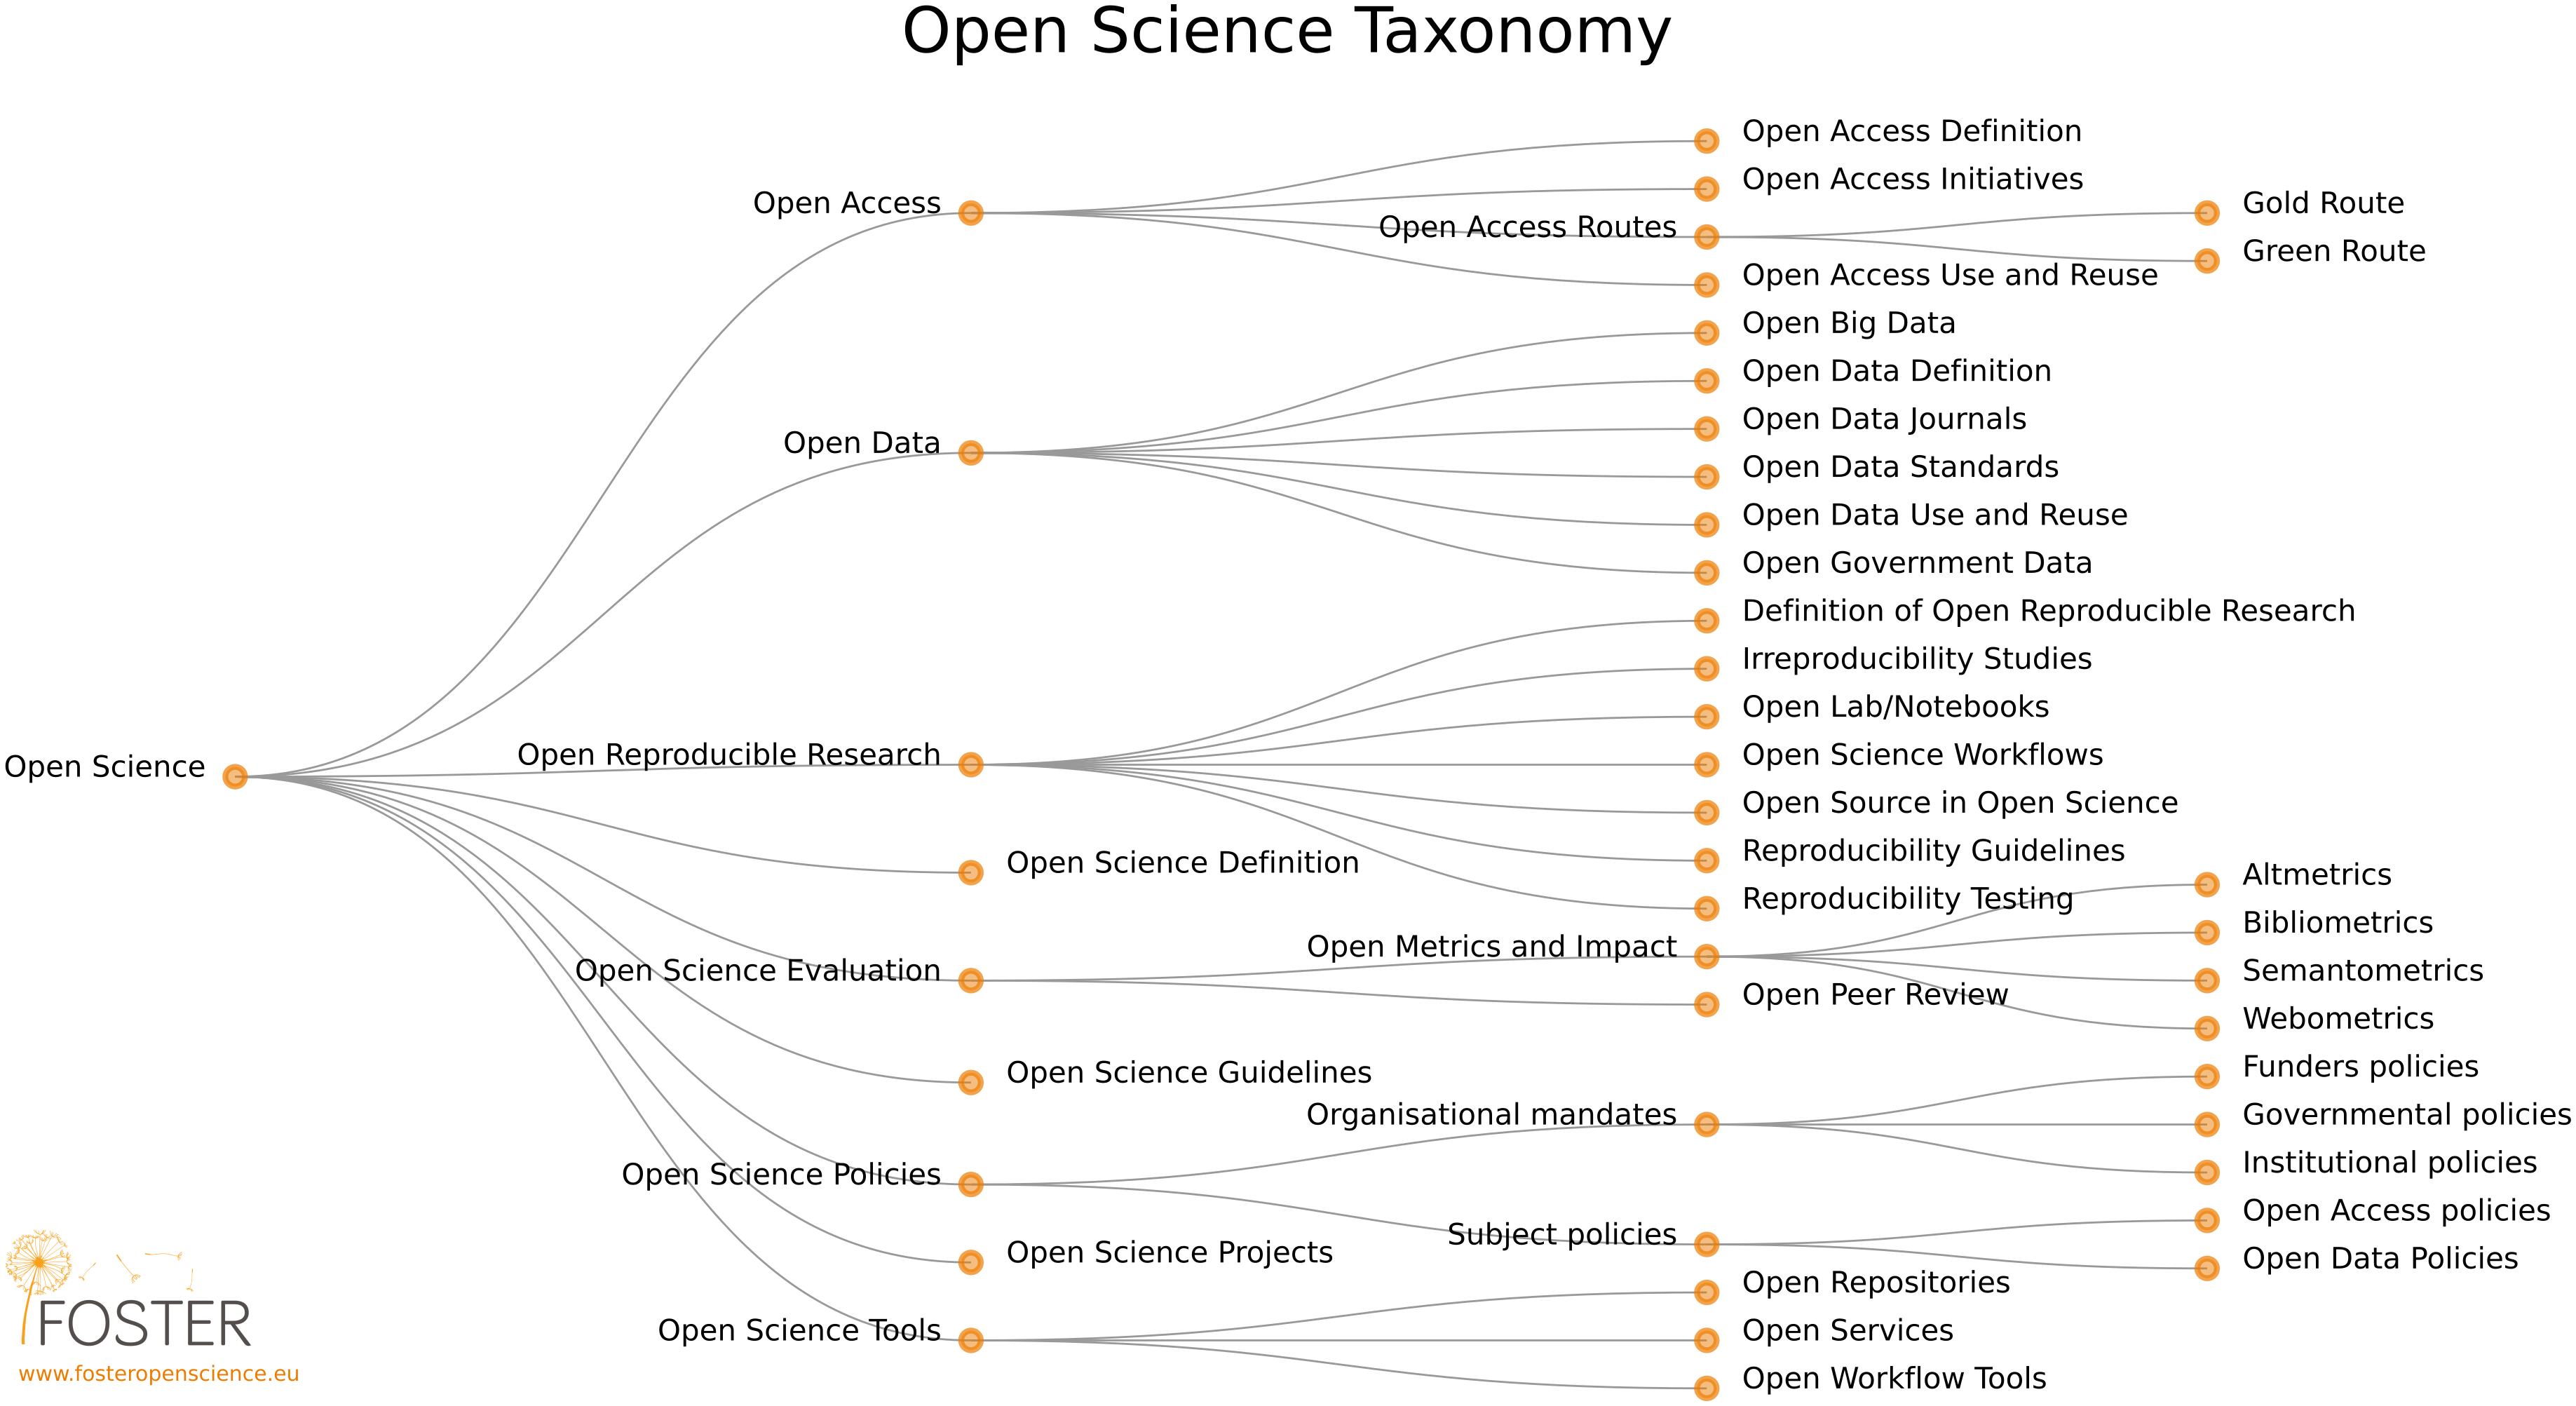 Research practices of open science. Source: Foster portal, 2023, Creactive Commons Attribution 4.0 International License.